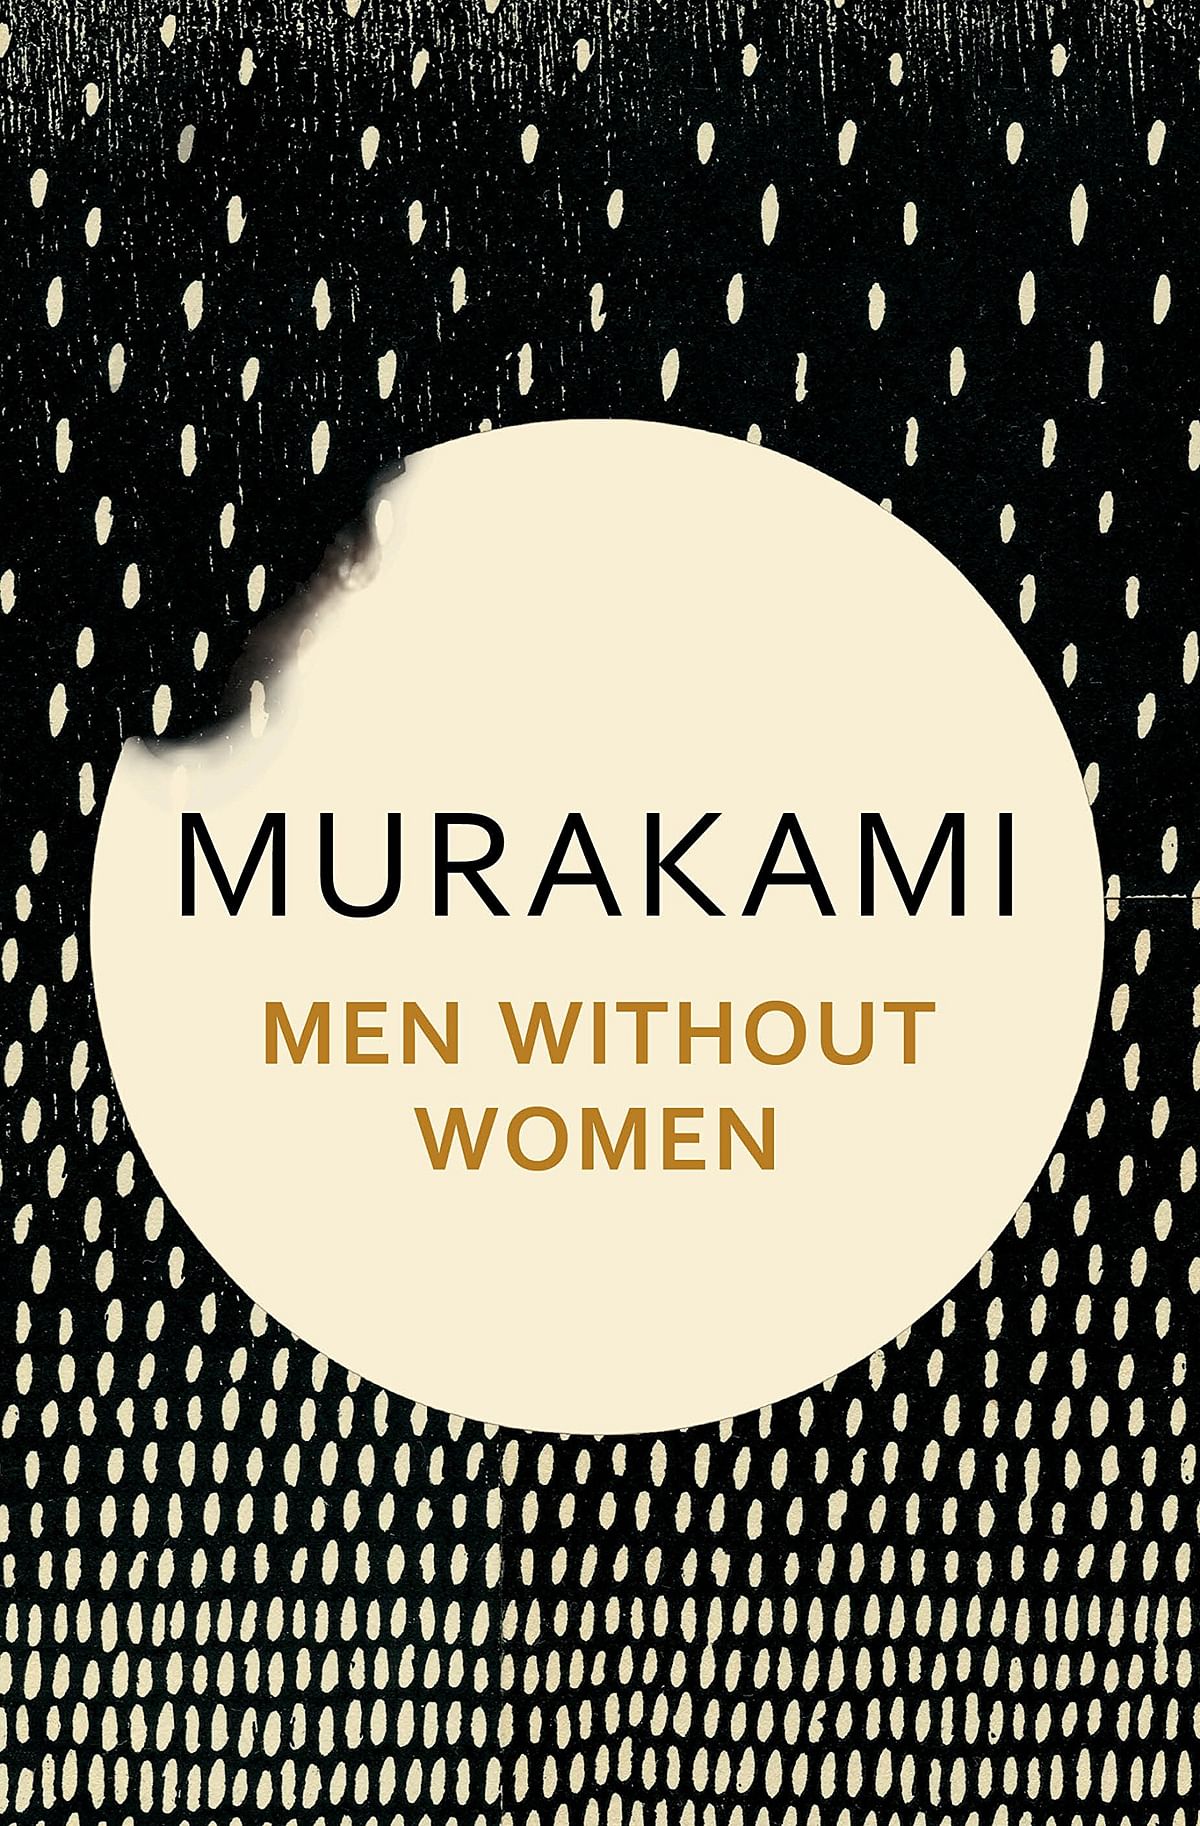 Haruki Murakami’s latest book, Men Without Women, is a collection of short stories.